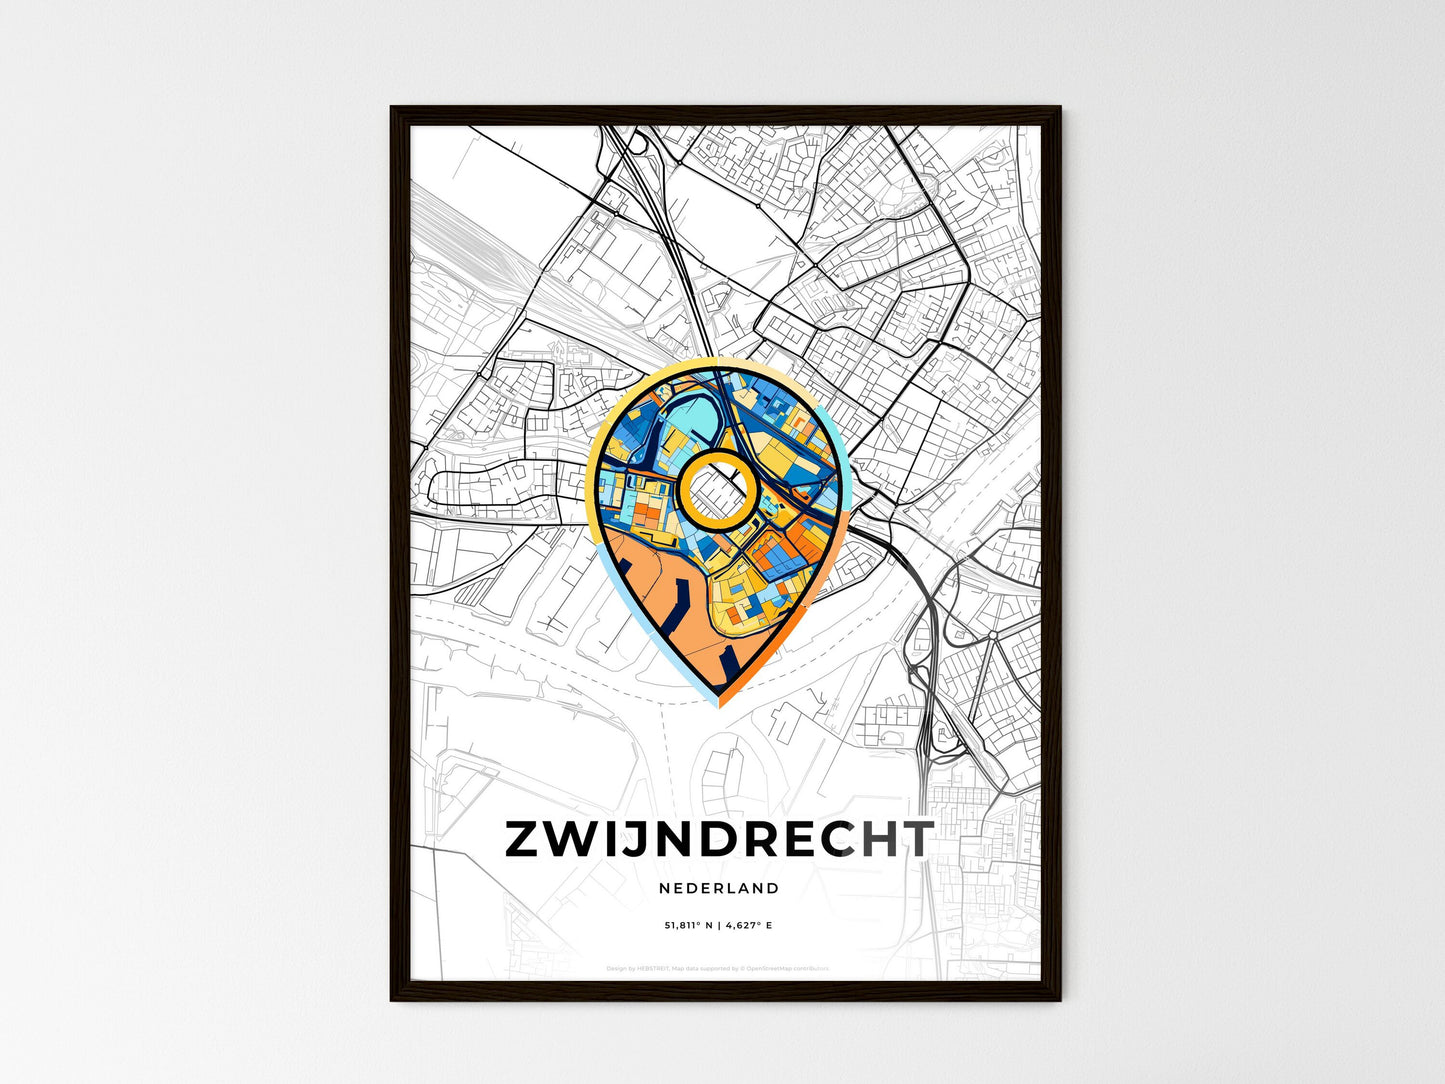 ZWIJNDRECHT NETHERLANDS minimal art map with a colorful icon. Where it all began, Couple map gift. Style 1